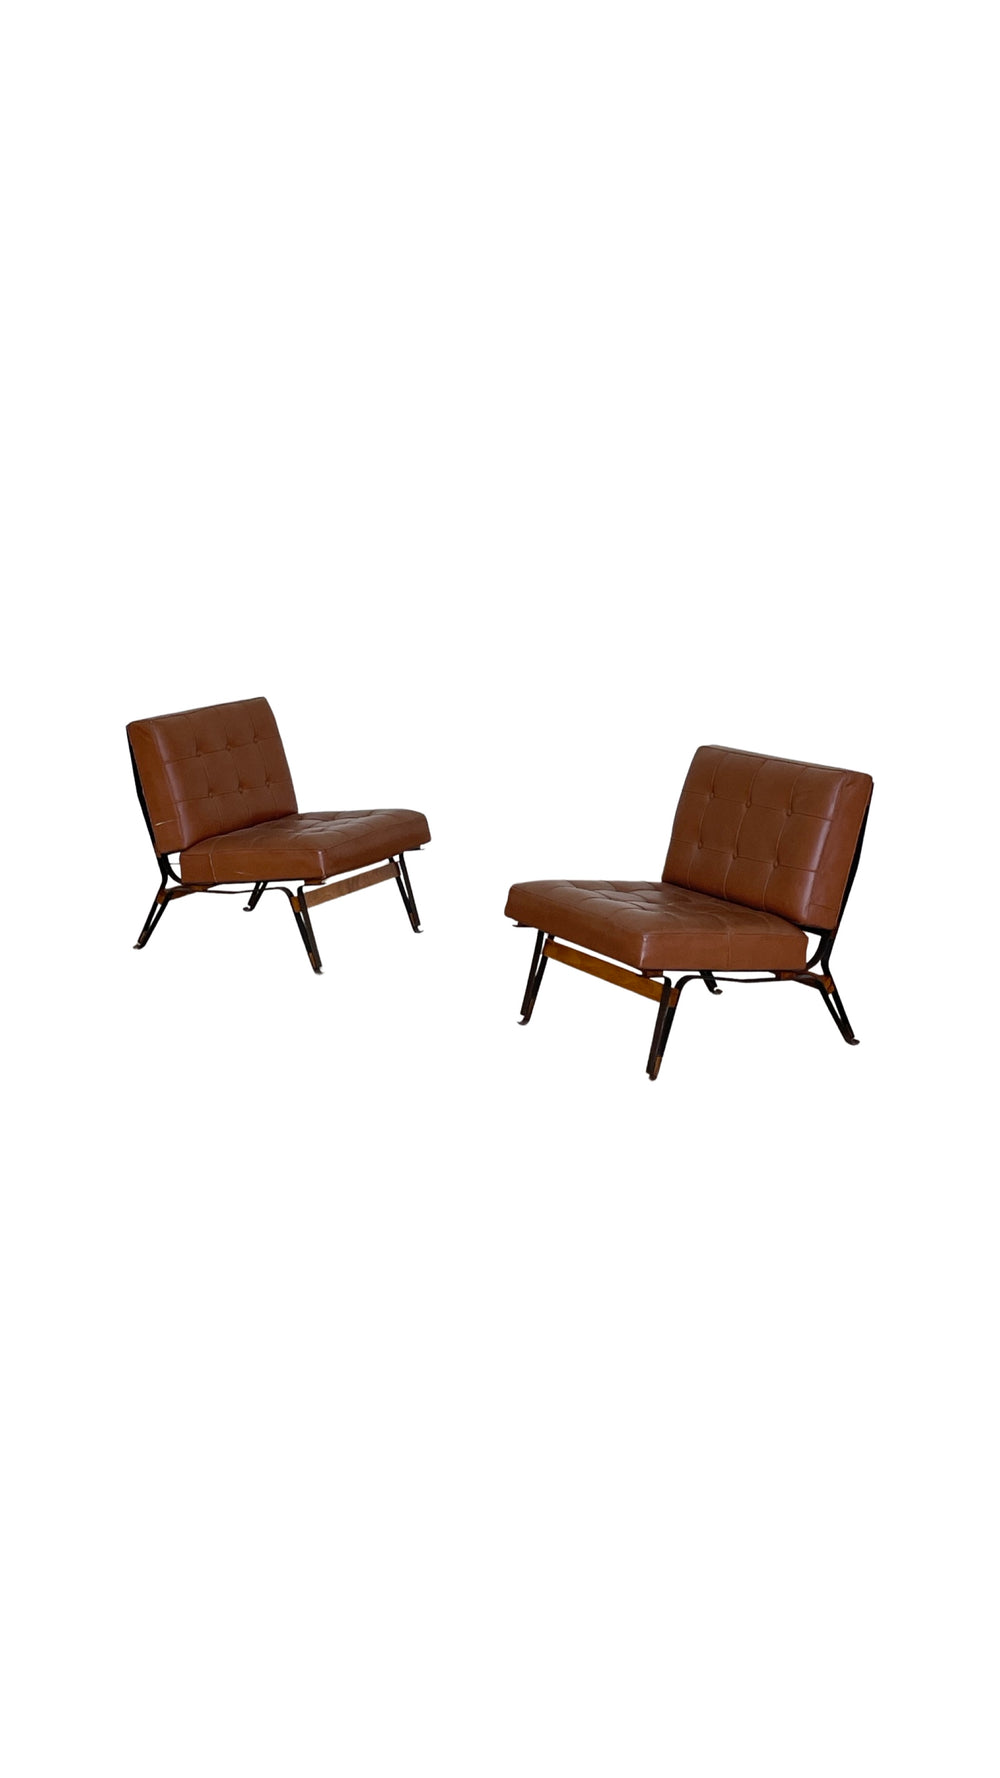 Ico Parisi model 856 rare pair of matched leather lounge chairs for Cassina, Italy, 1950s